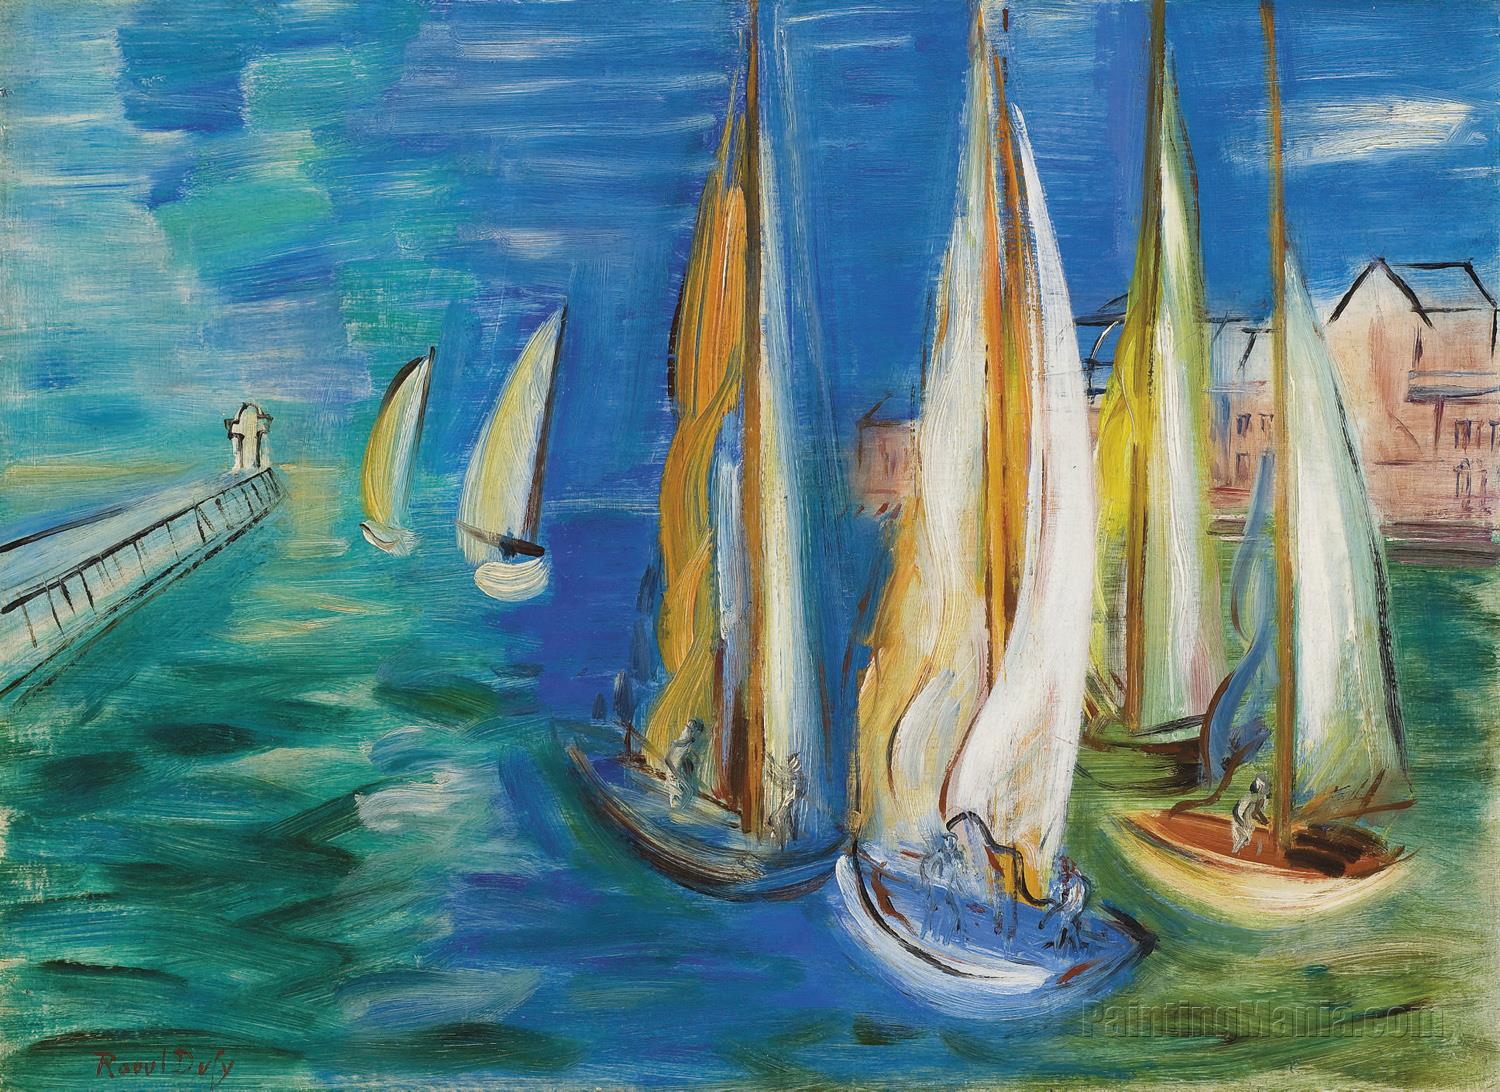 Departure of the Sailboats in Deauville